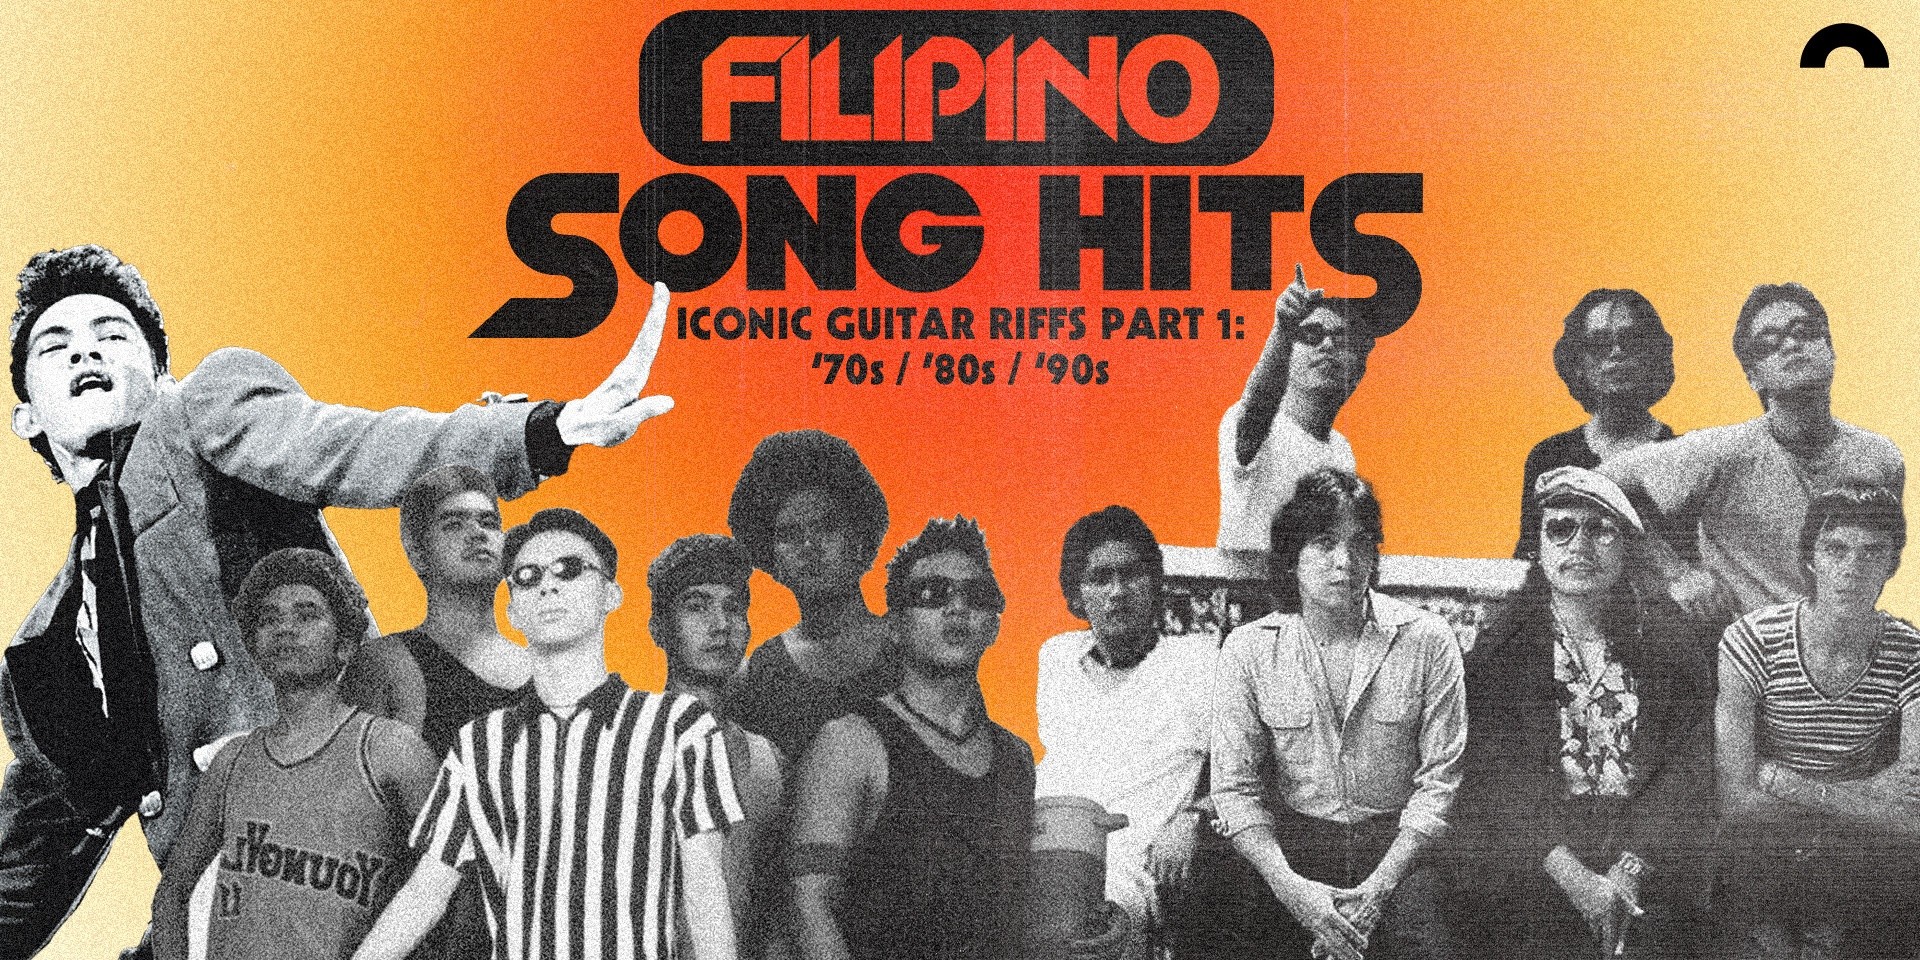 Filipino Song Hits: iconic guitar riffs part 1 - the '70s, '80s, '90s